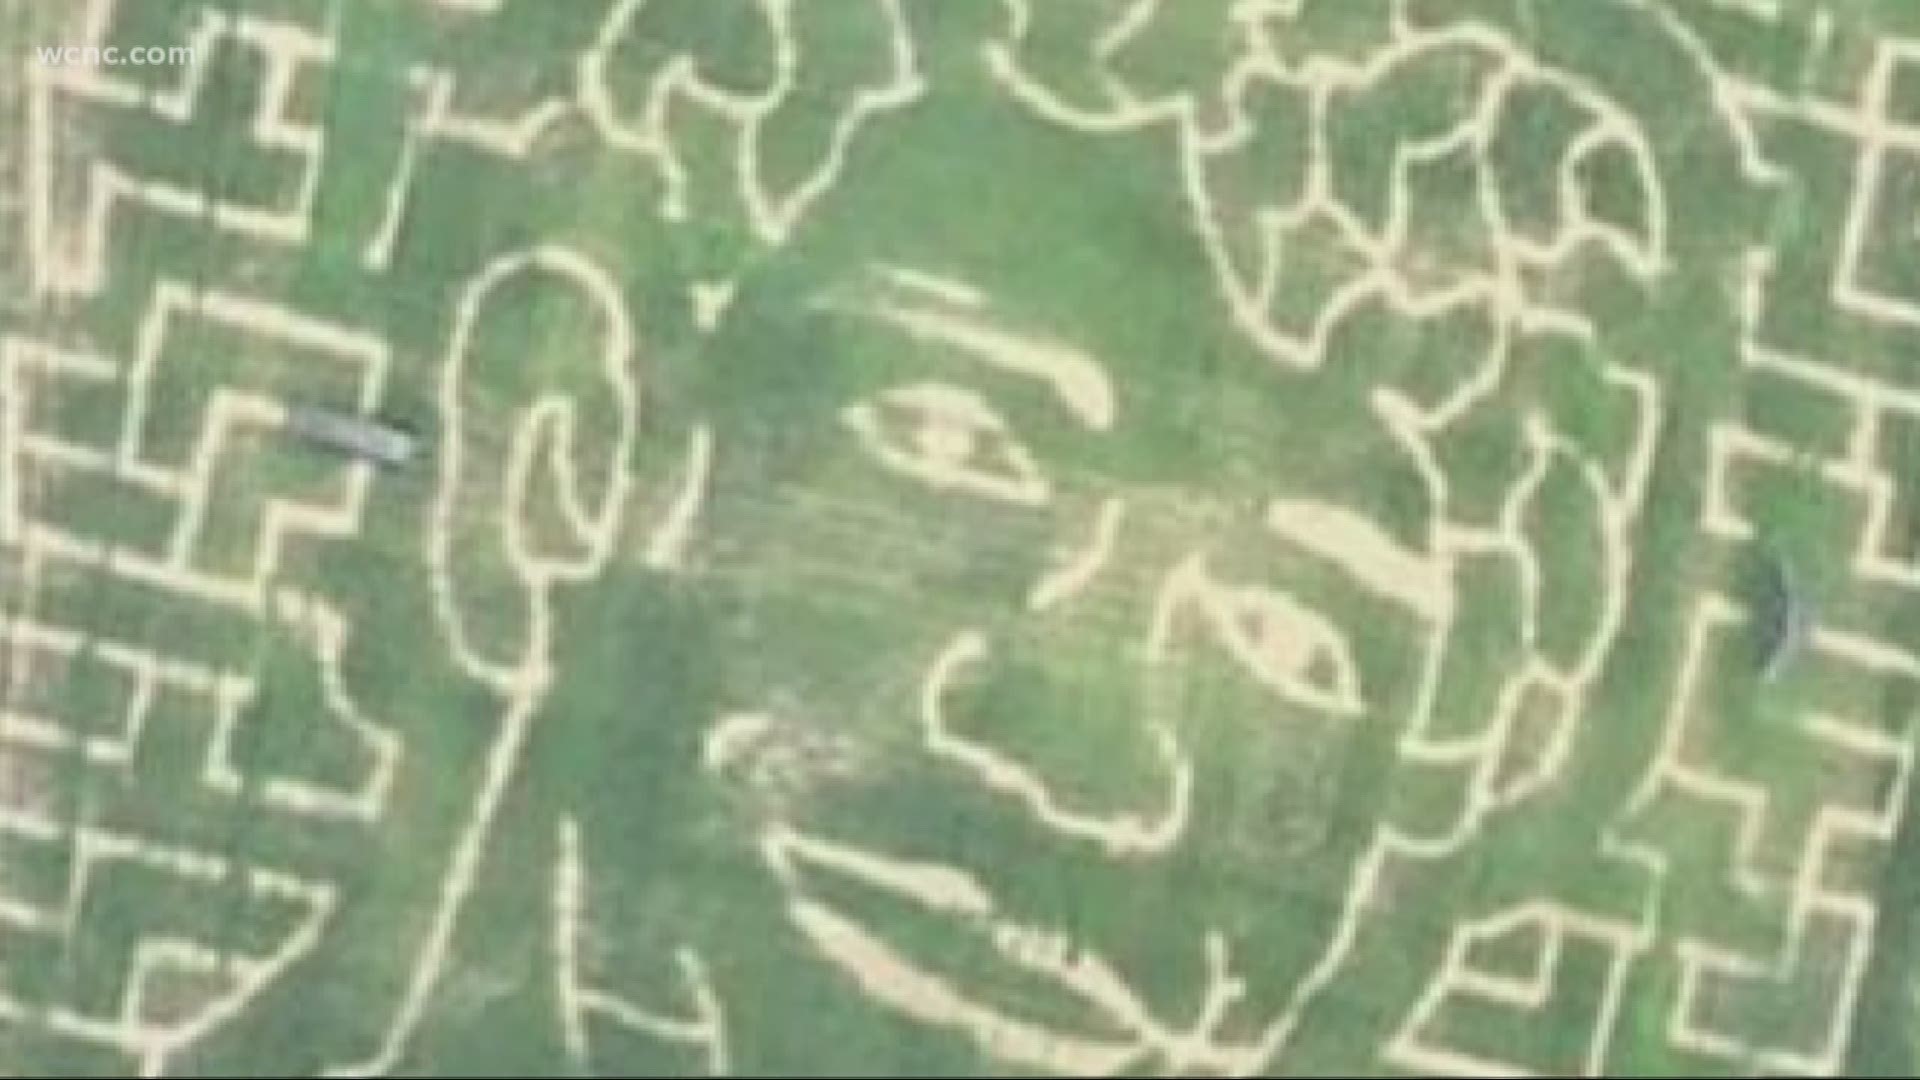 A farmer from Riley Howell's hometown is making sure the hero will be remembered come this fall. Every year, Skipper Russell has a different pattern in his corn maze. This year, it will honor Howell.